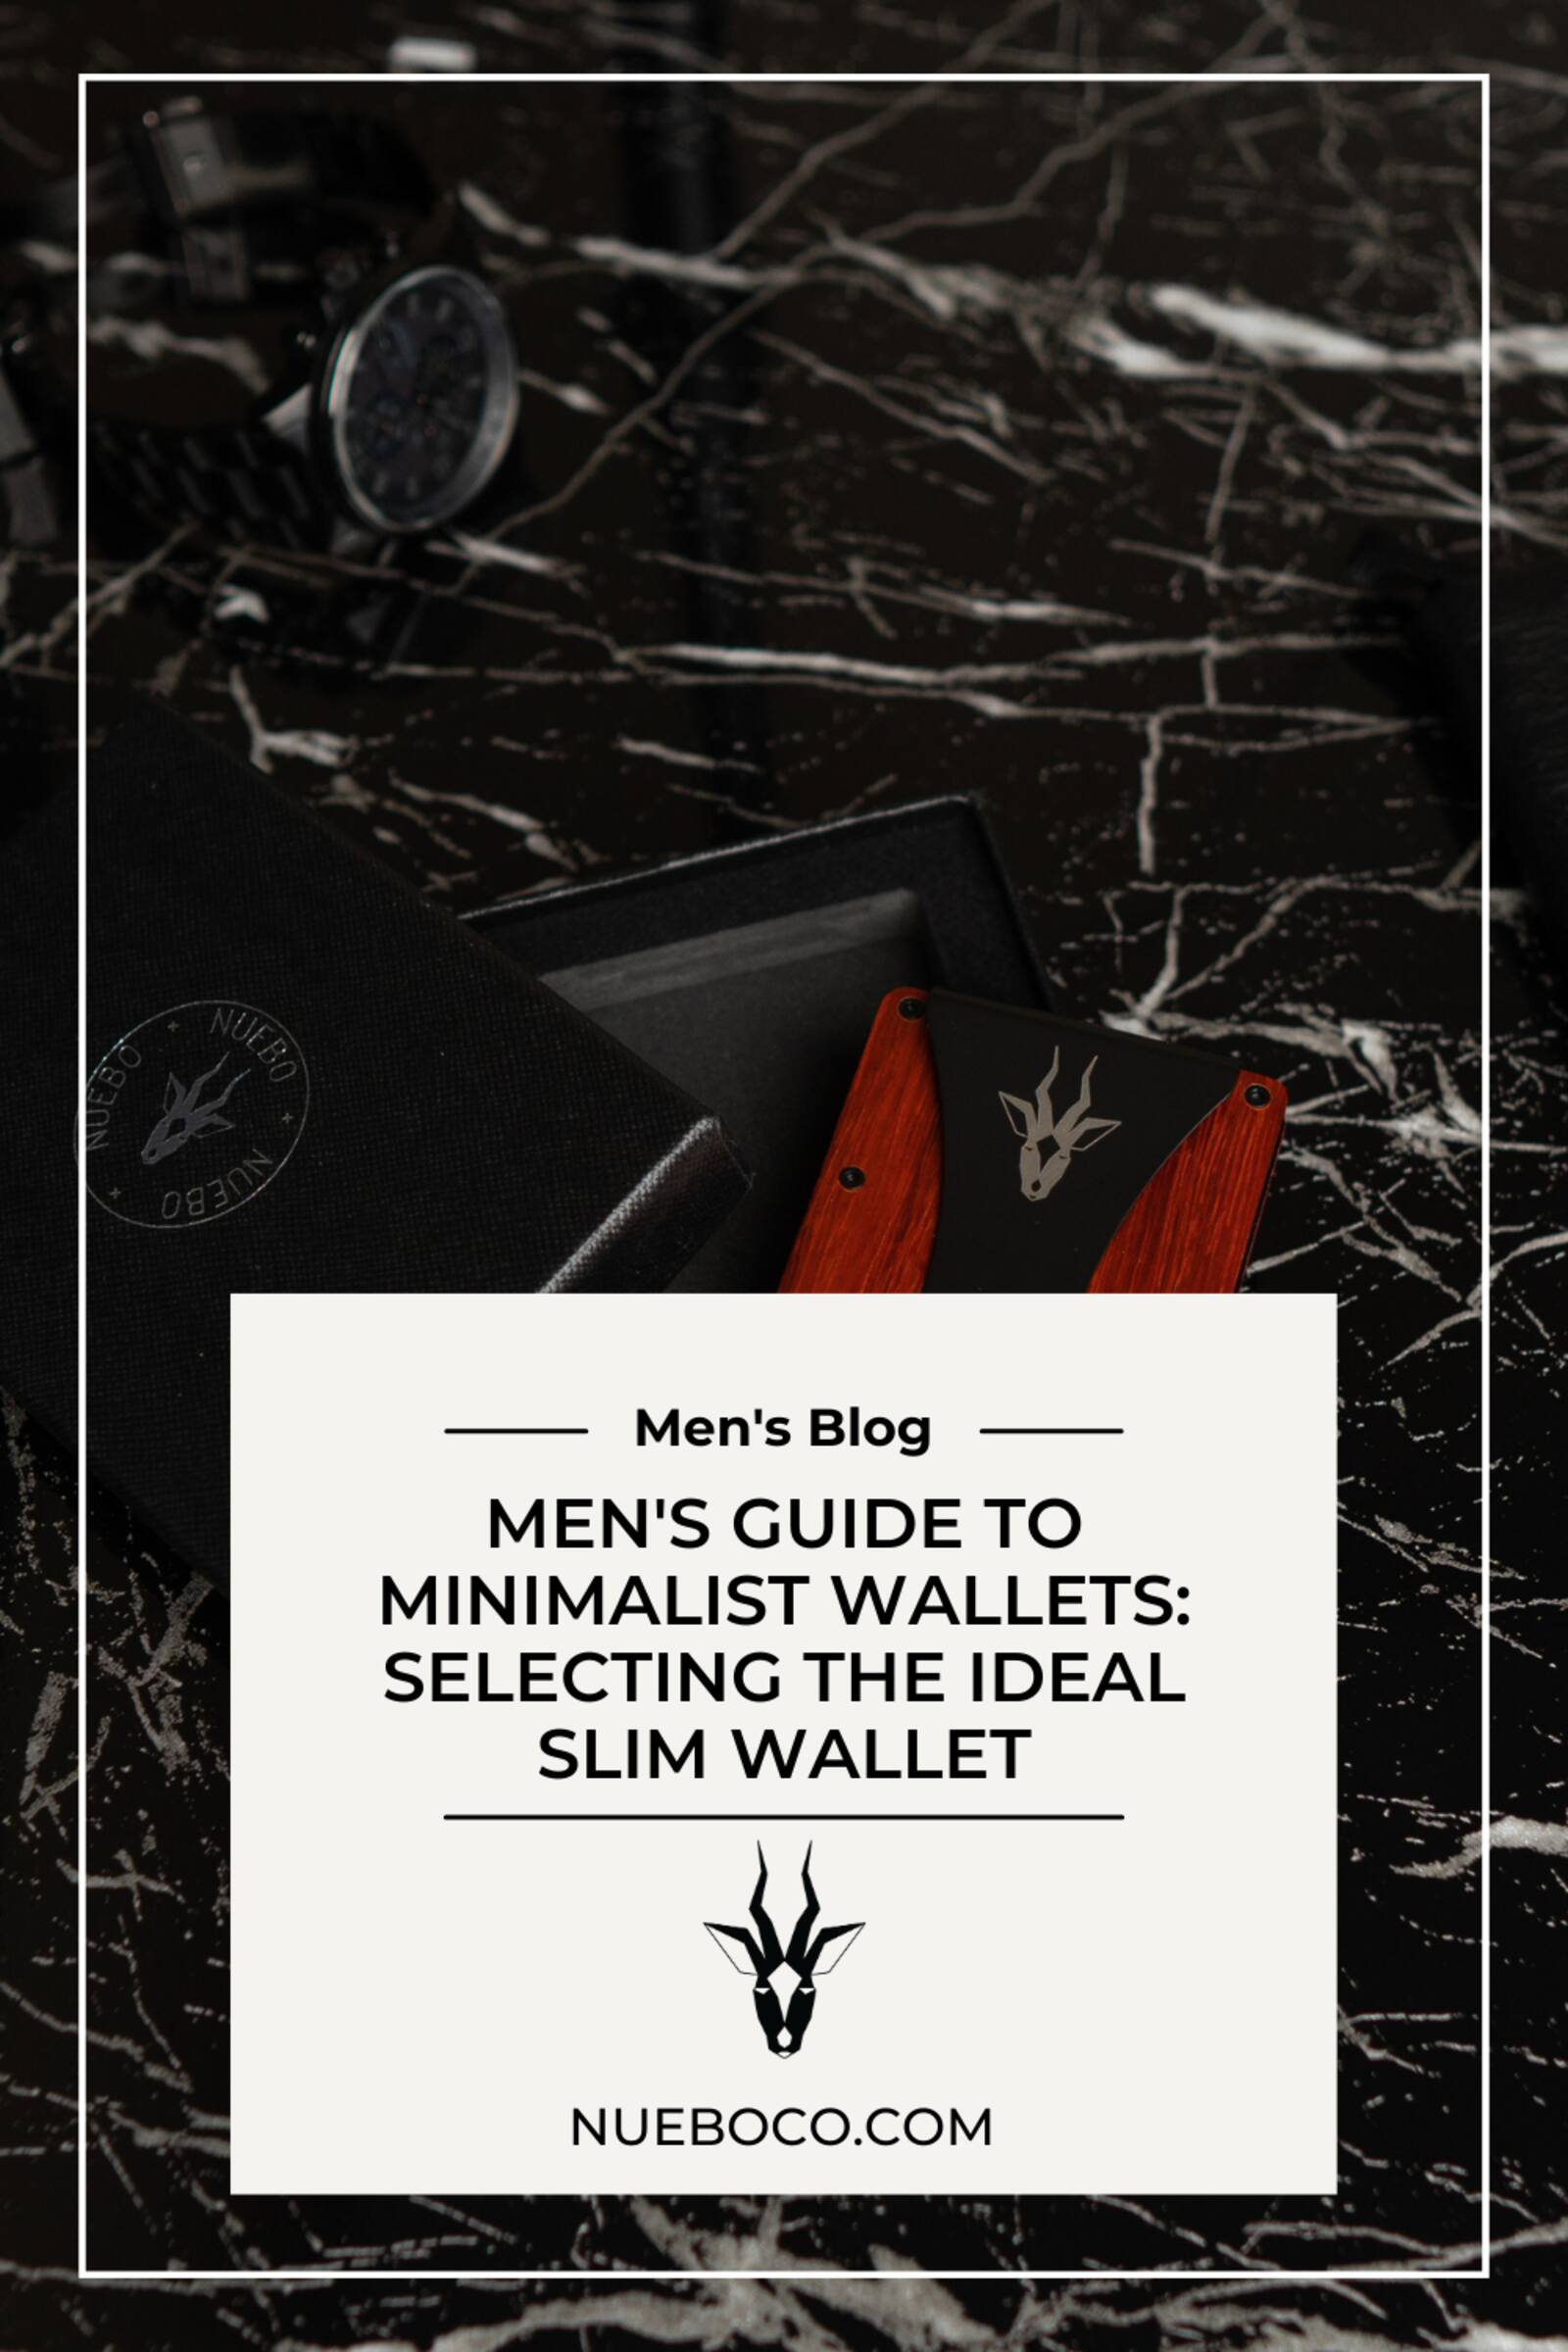 Men's Guide to Minimalist Wallets: Selecting the Ideal Slim Wallet